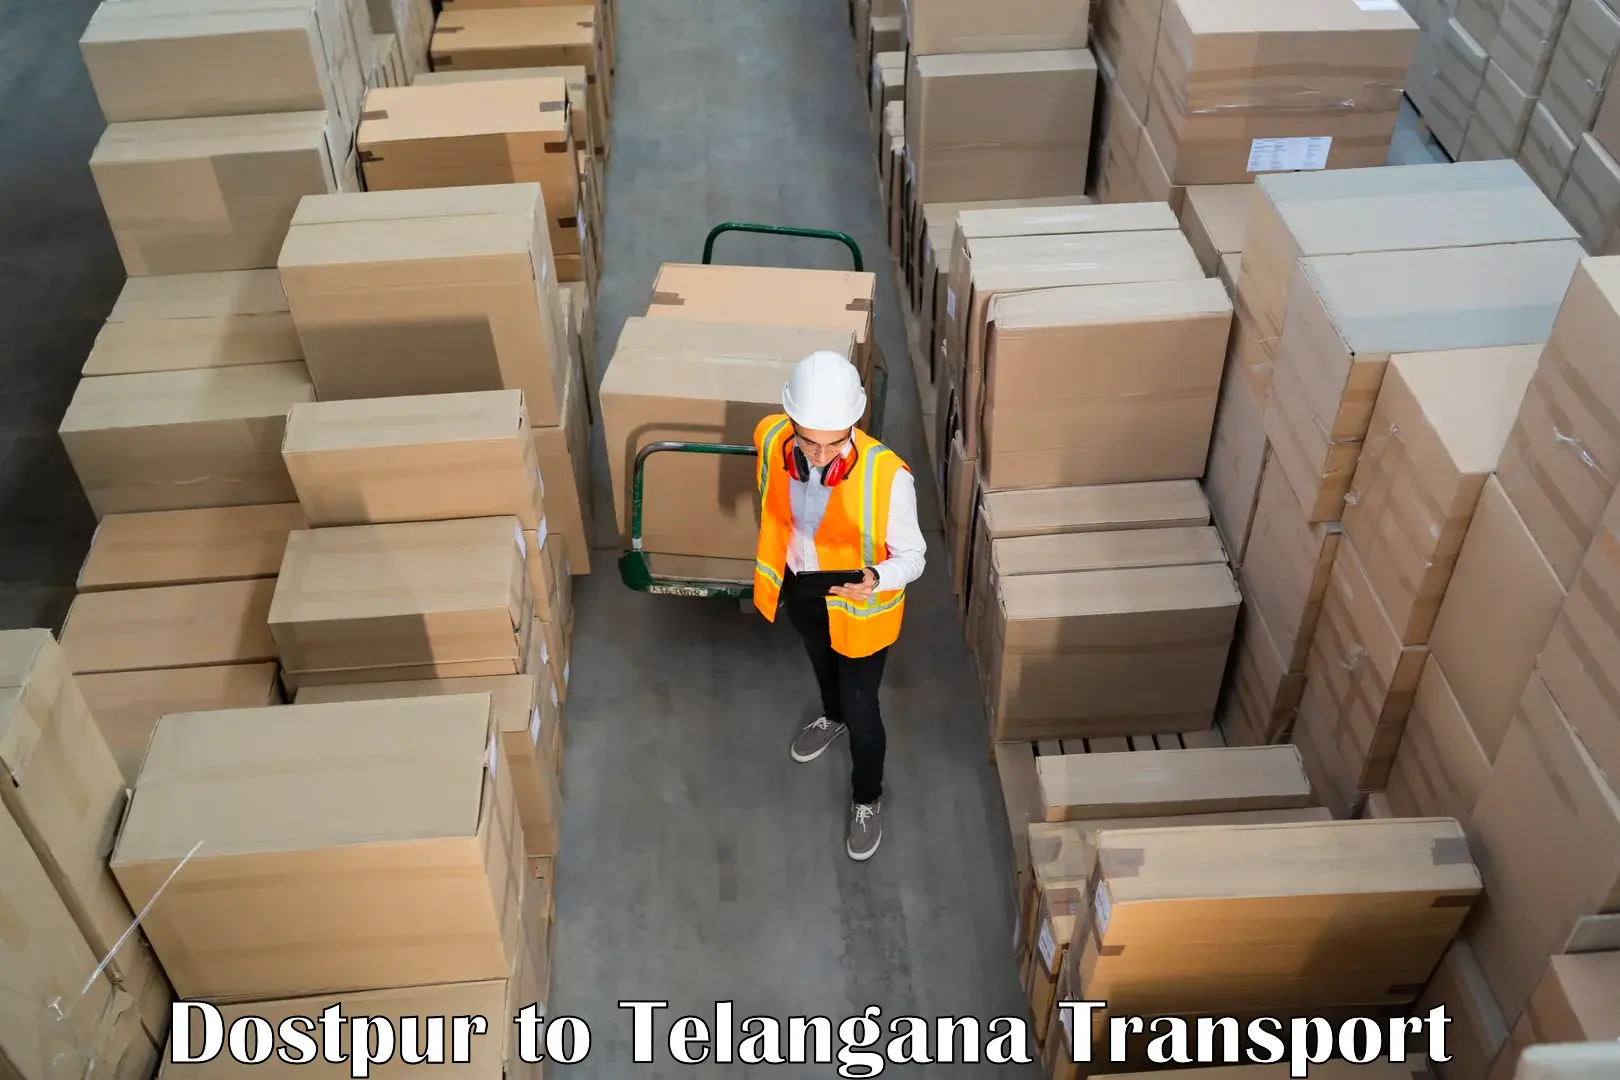 Domestic goods transportation services Dostpur to Trimulgherry